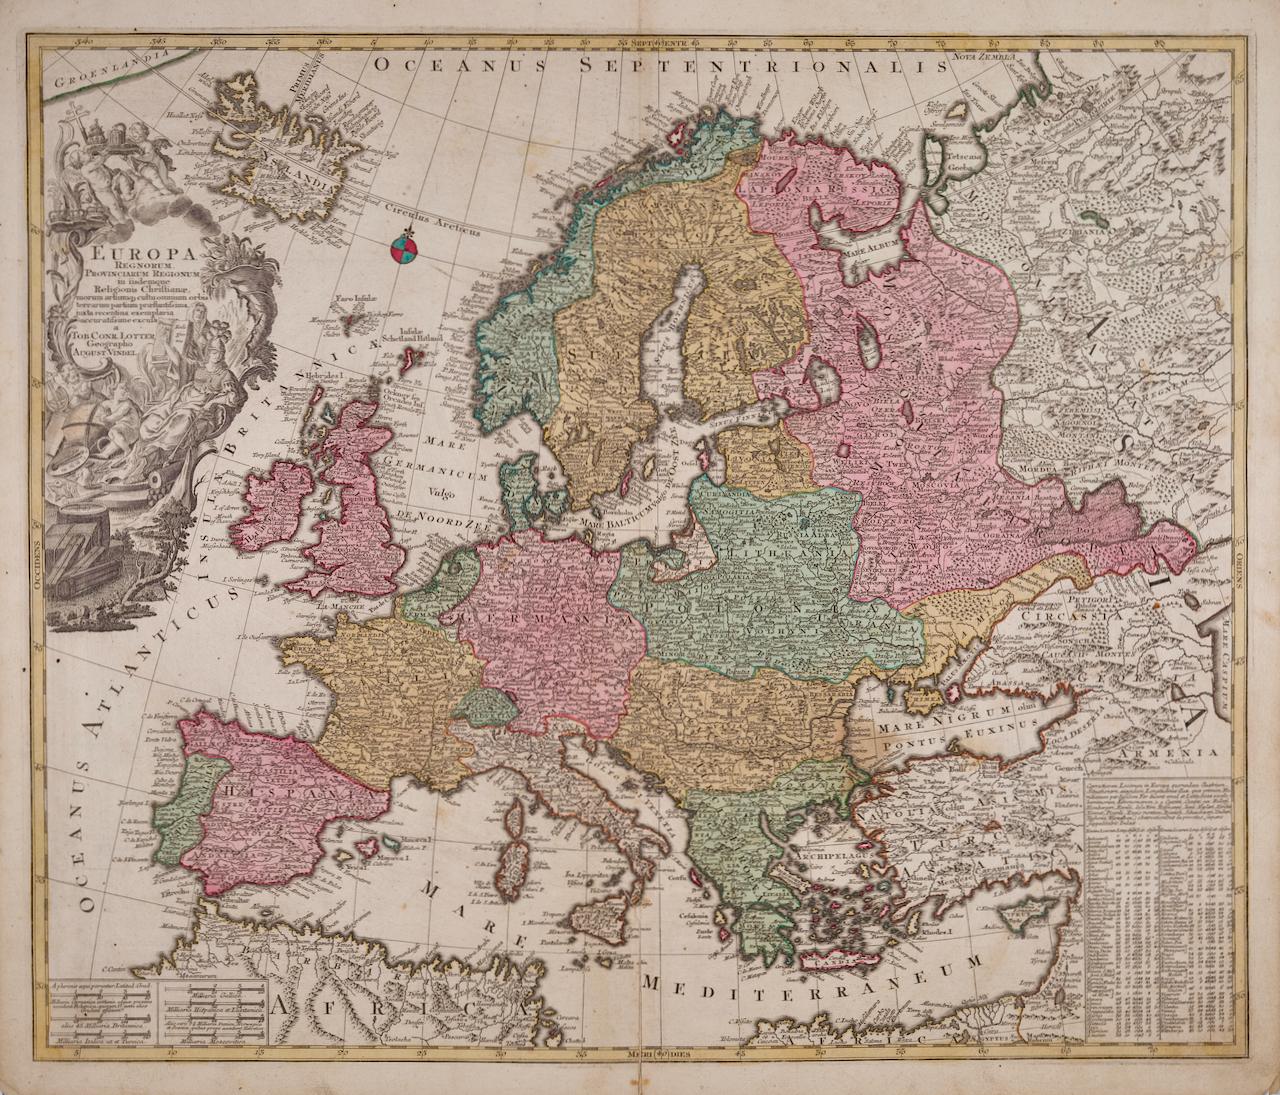 Europa Regnorum Provinciarum: 18th Century Hand-colored Map of Europe by Lotter